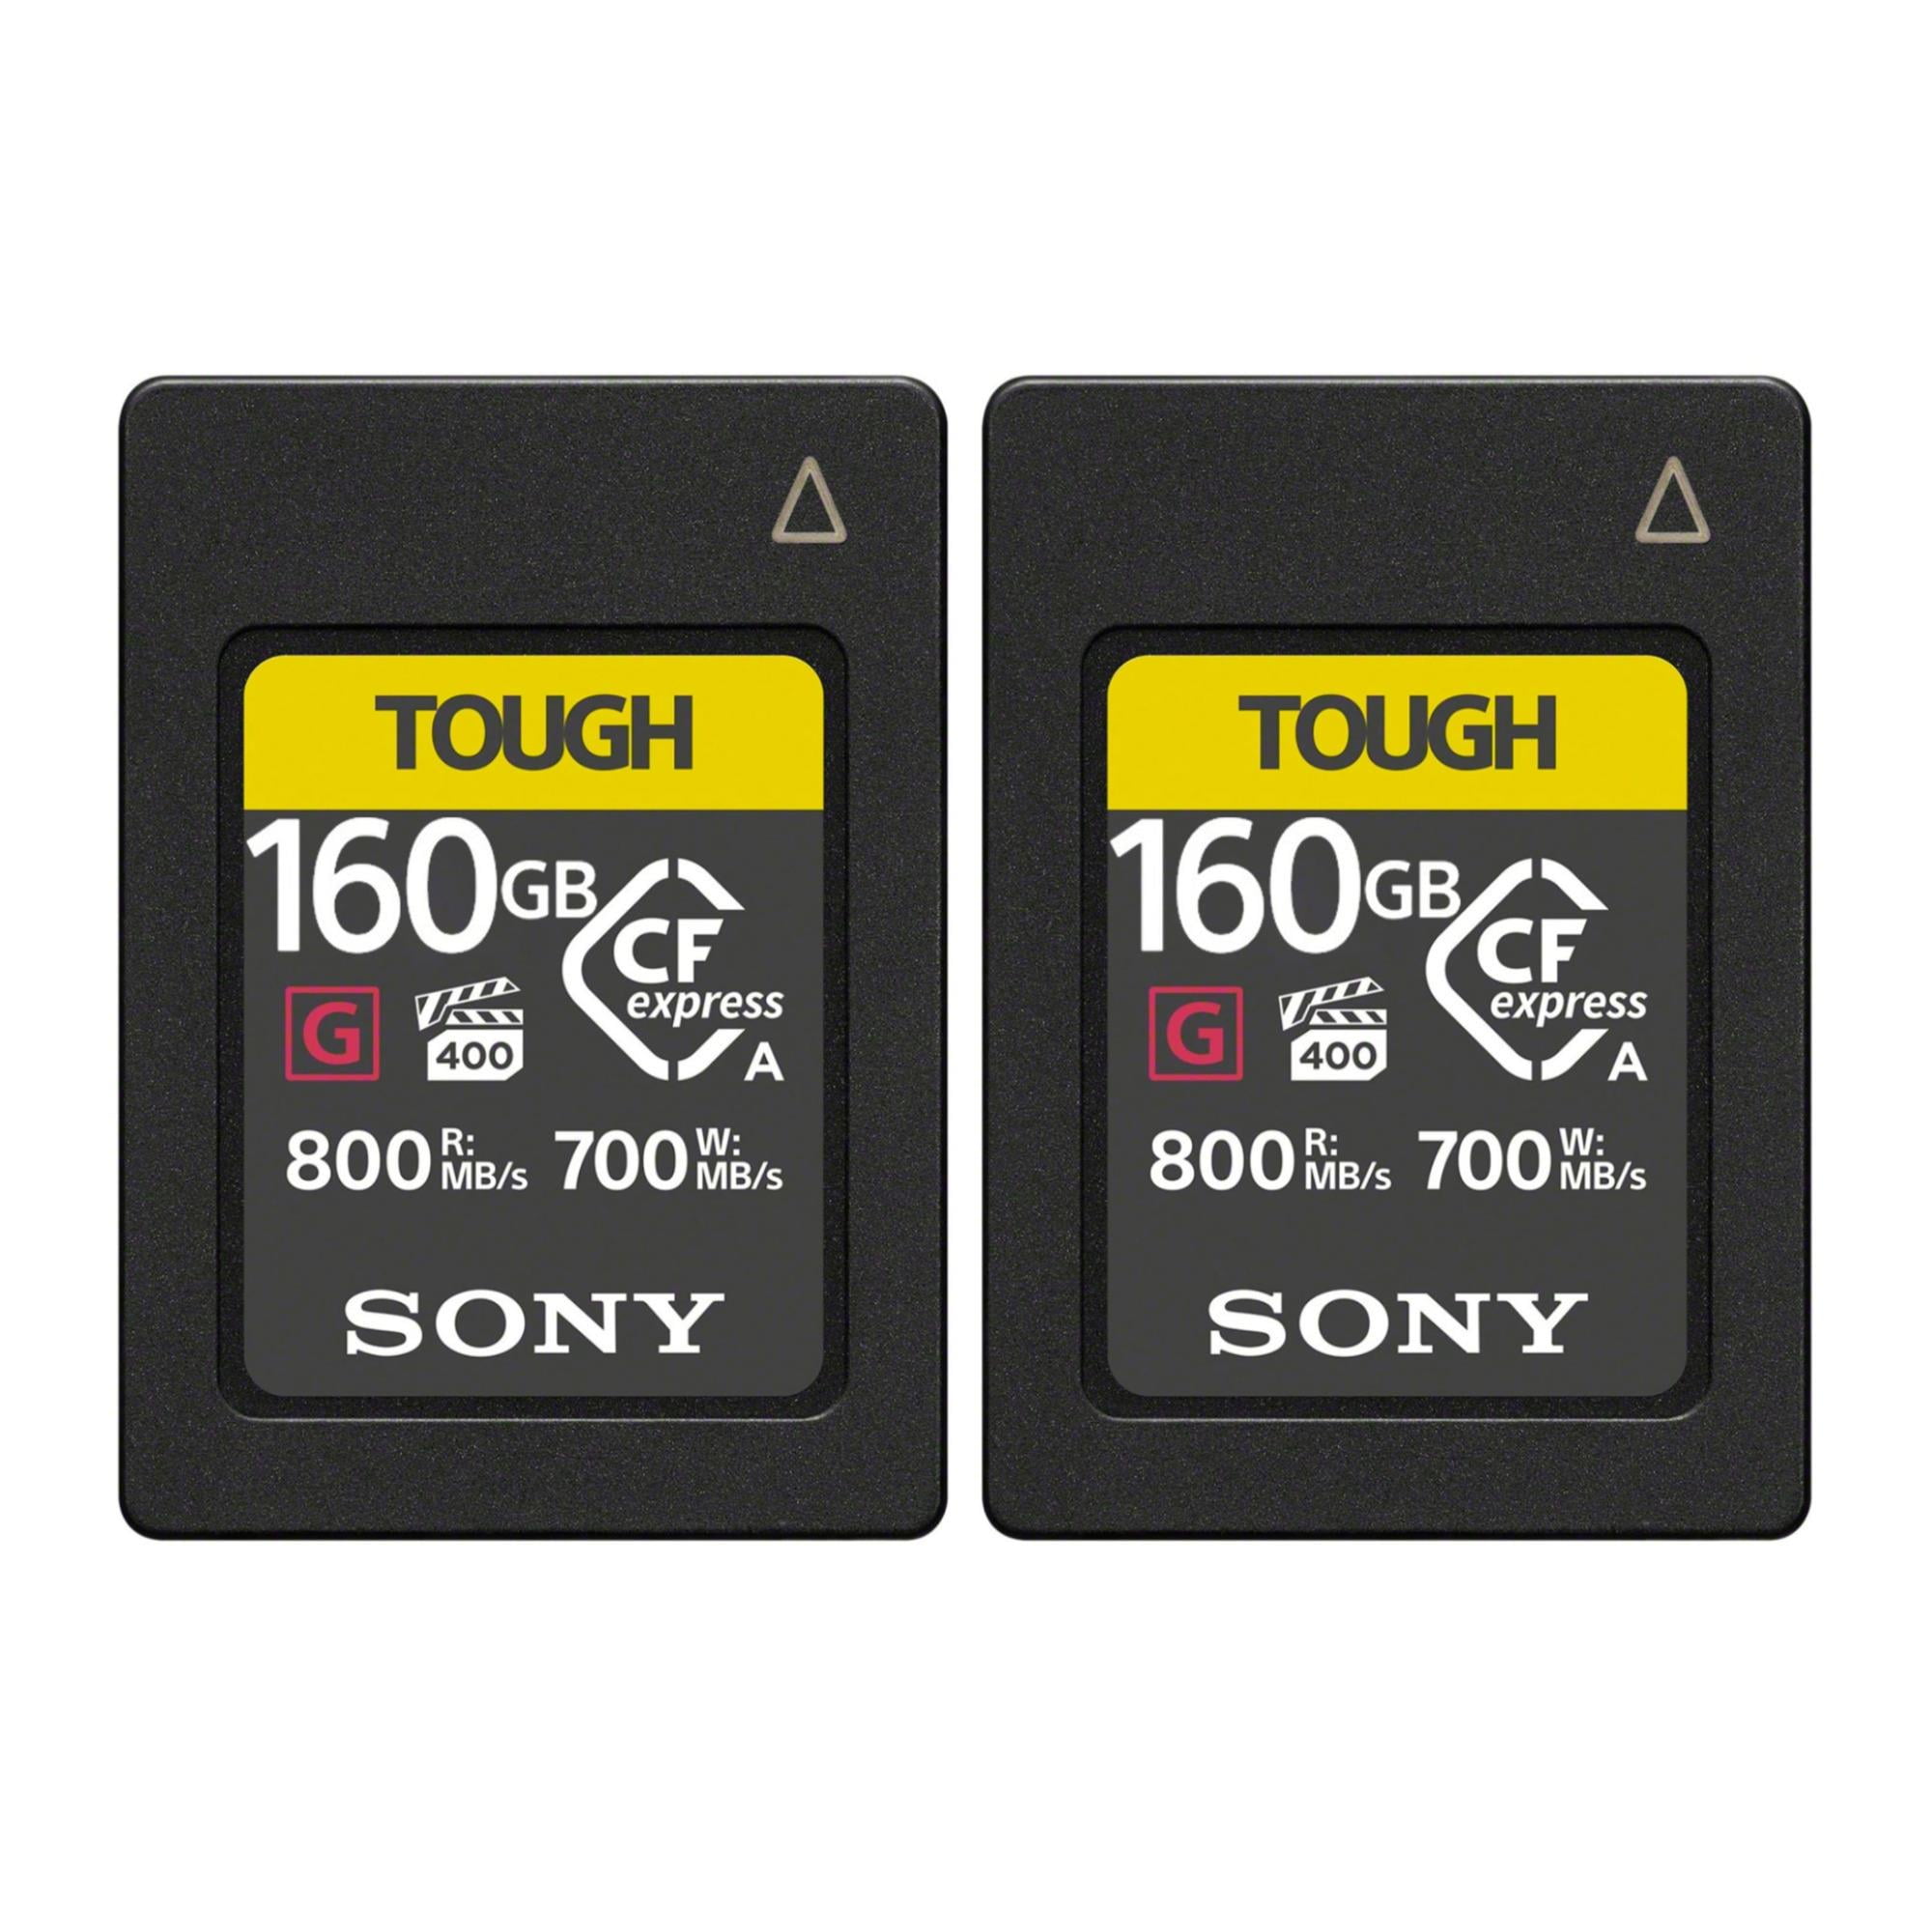 Sony CFexpress Type A 160GB Memory Card (2-Pack) Bundle